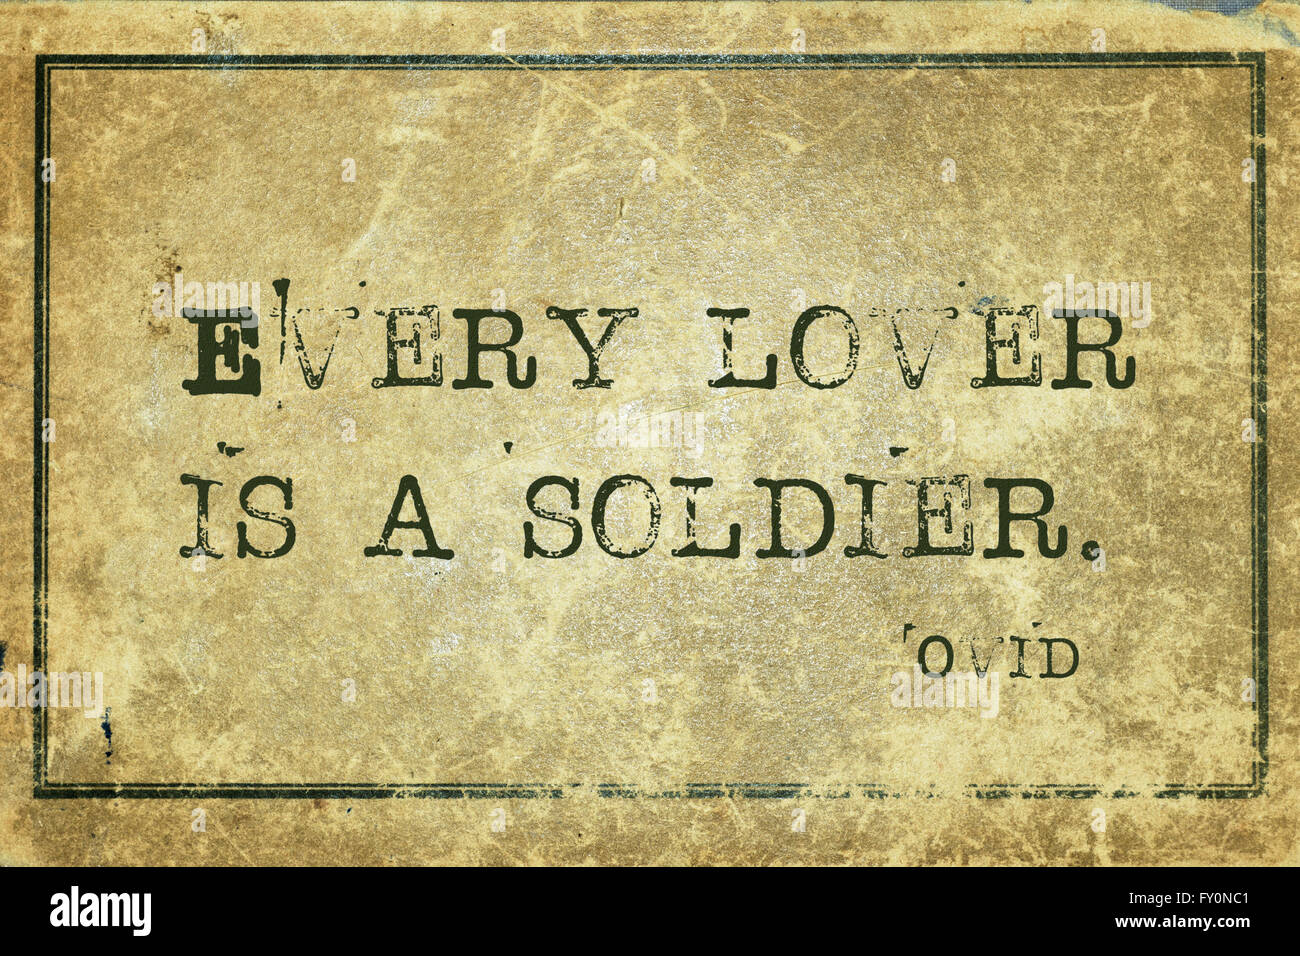 Every lover is a soldier - ancient Roman poet Ovid quote printed on grunge vintage cardboard Stock Photo